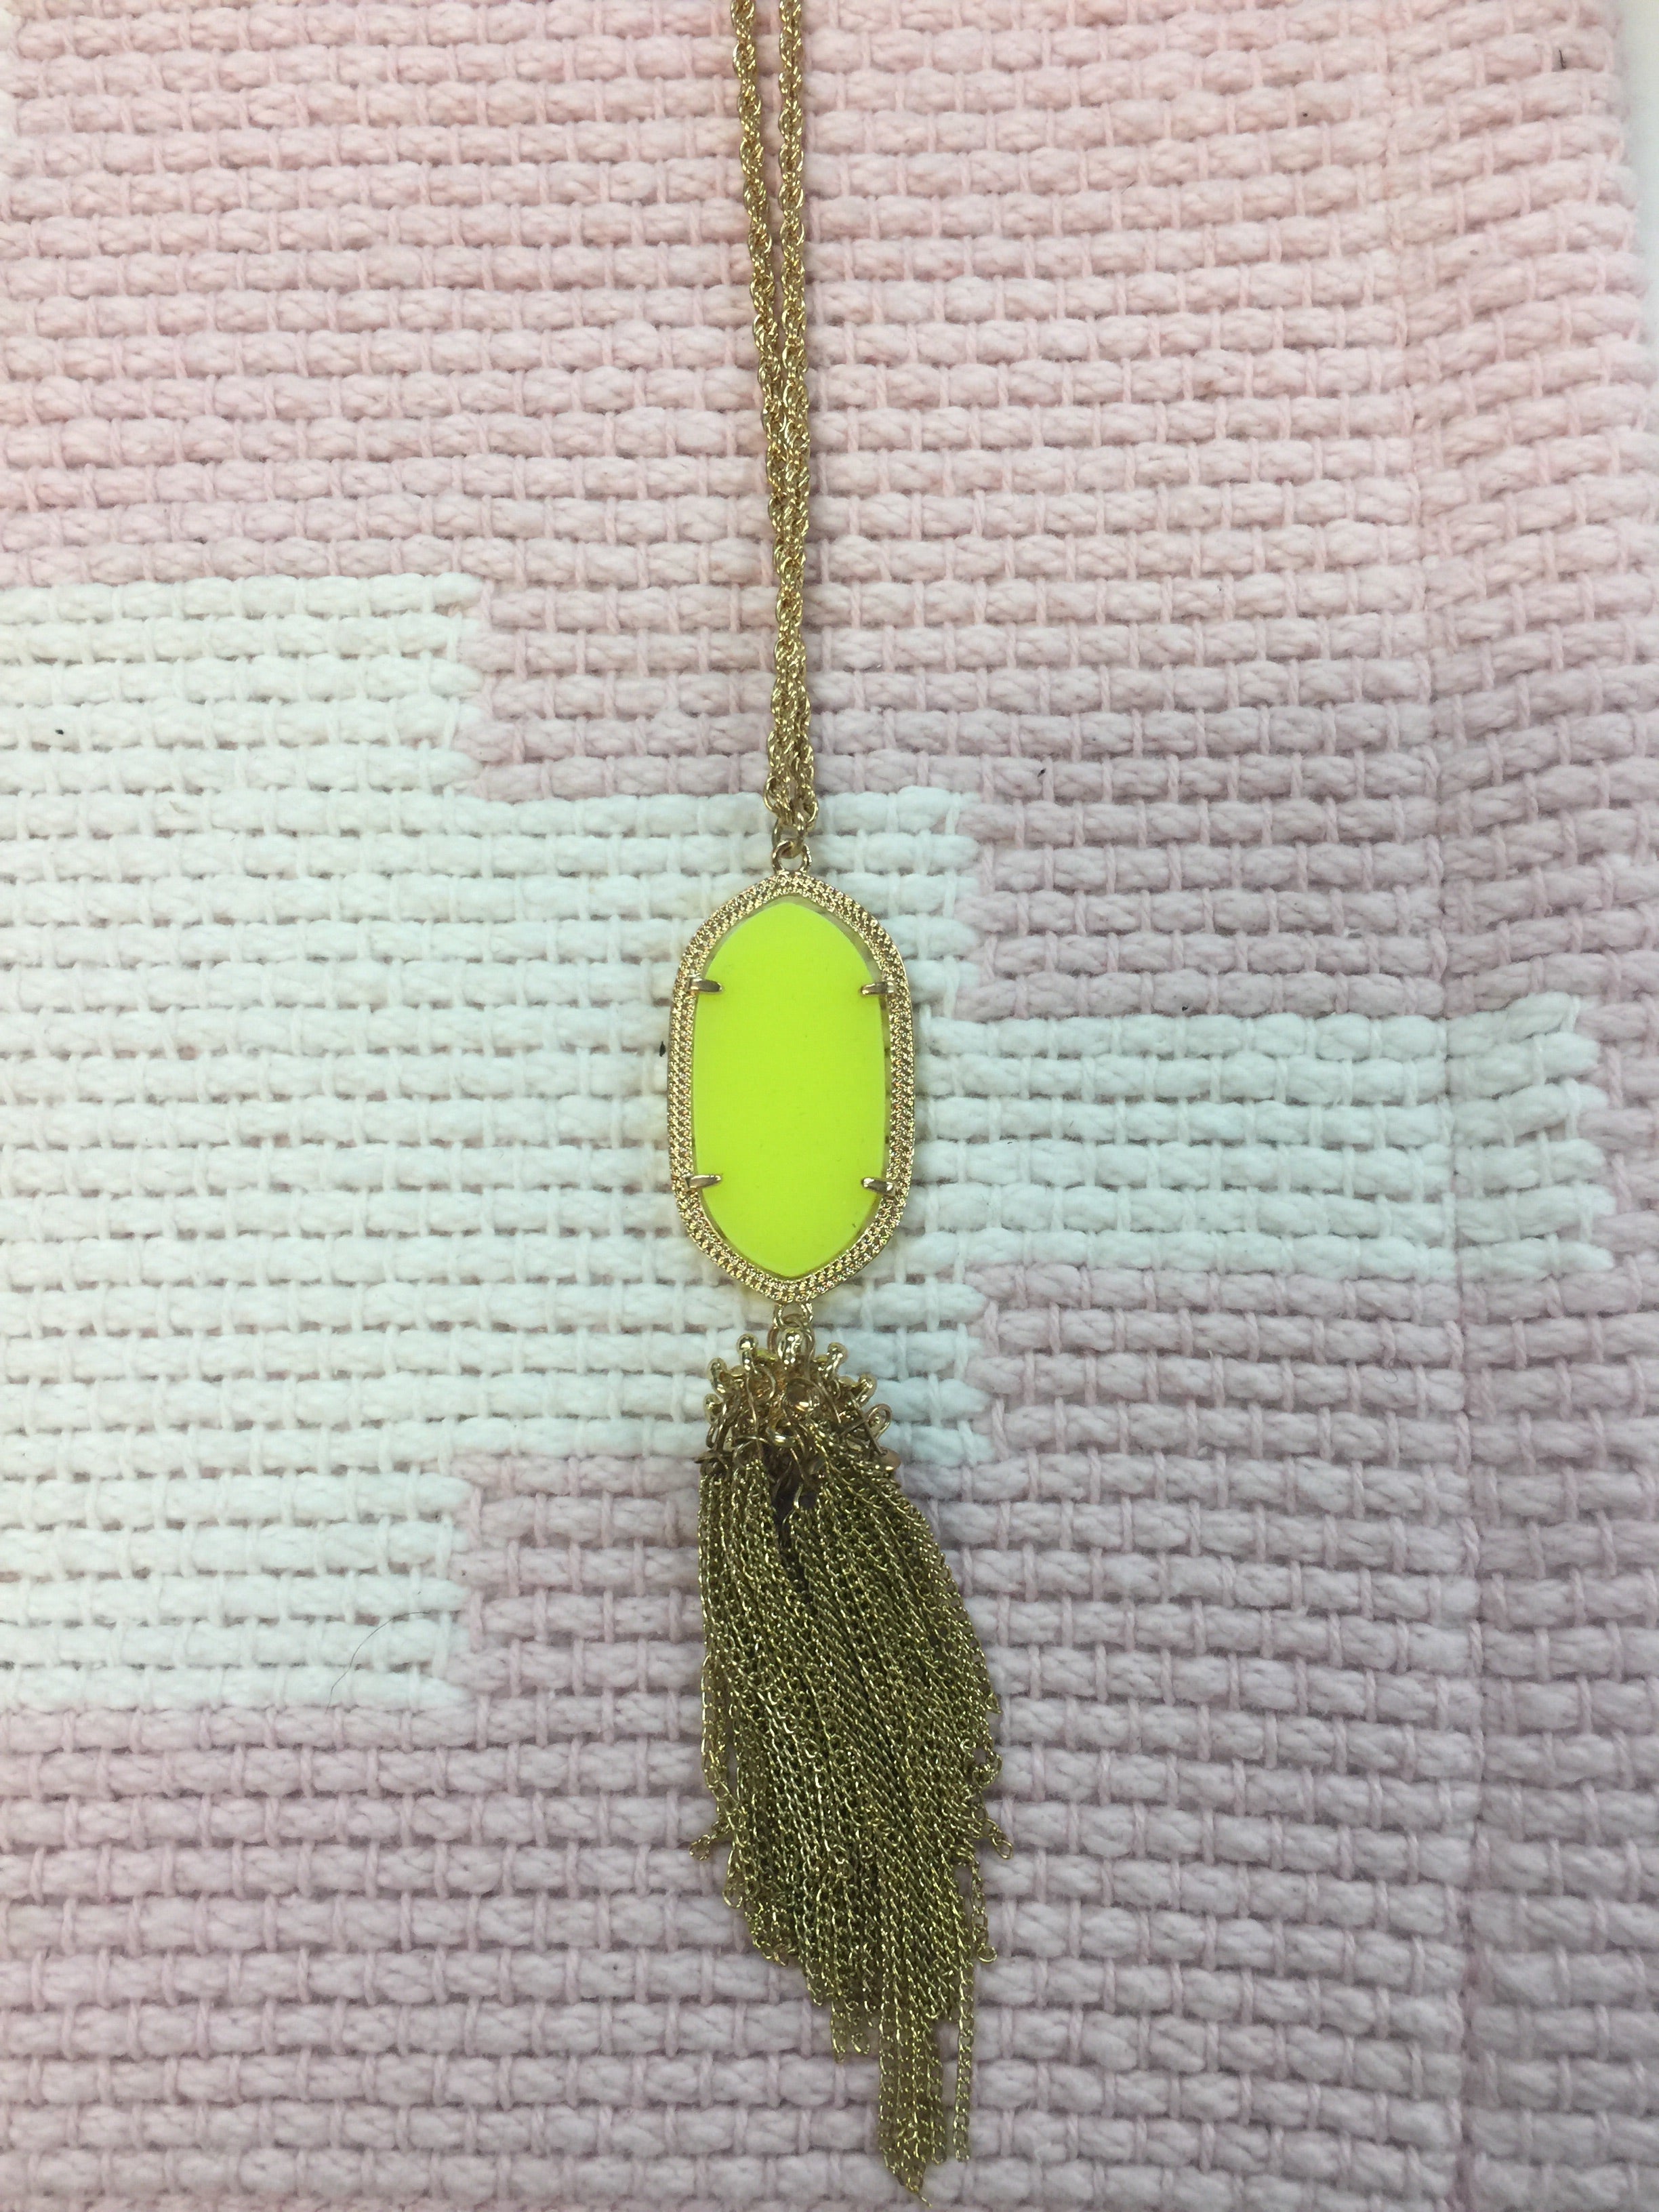 Gold Chain Necklace with Neon Yellow Oval Pendant and Chain Tassel